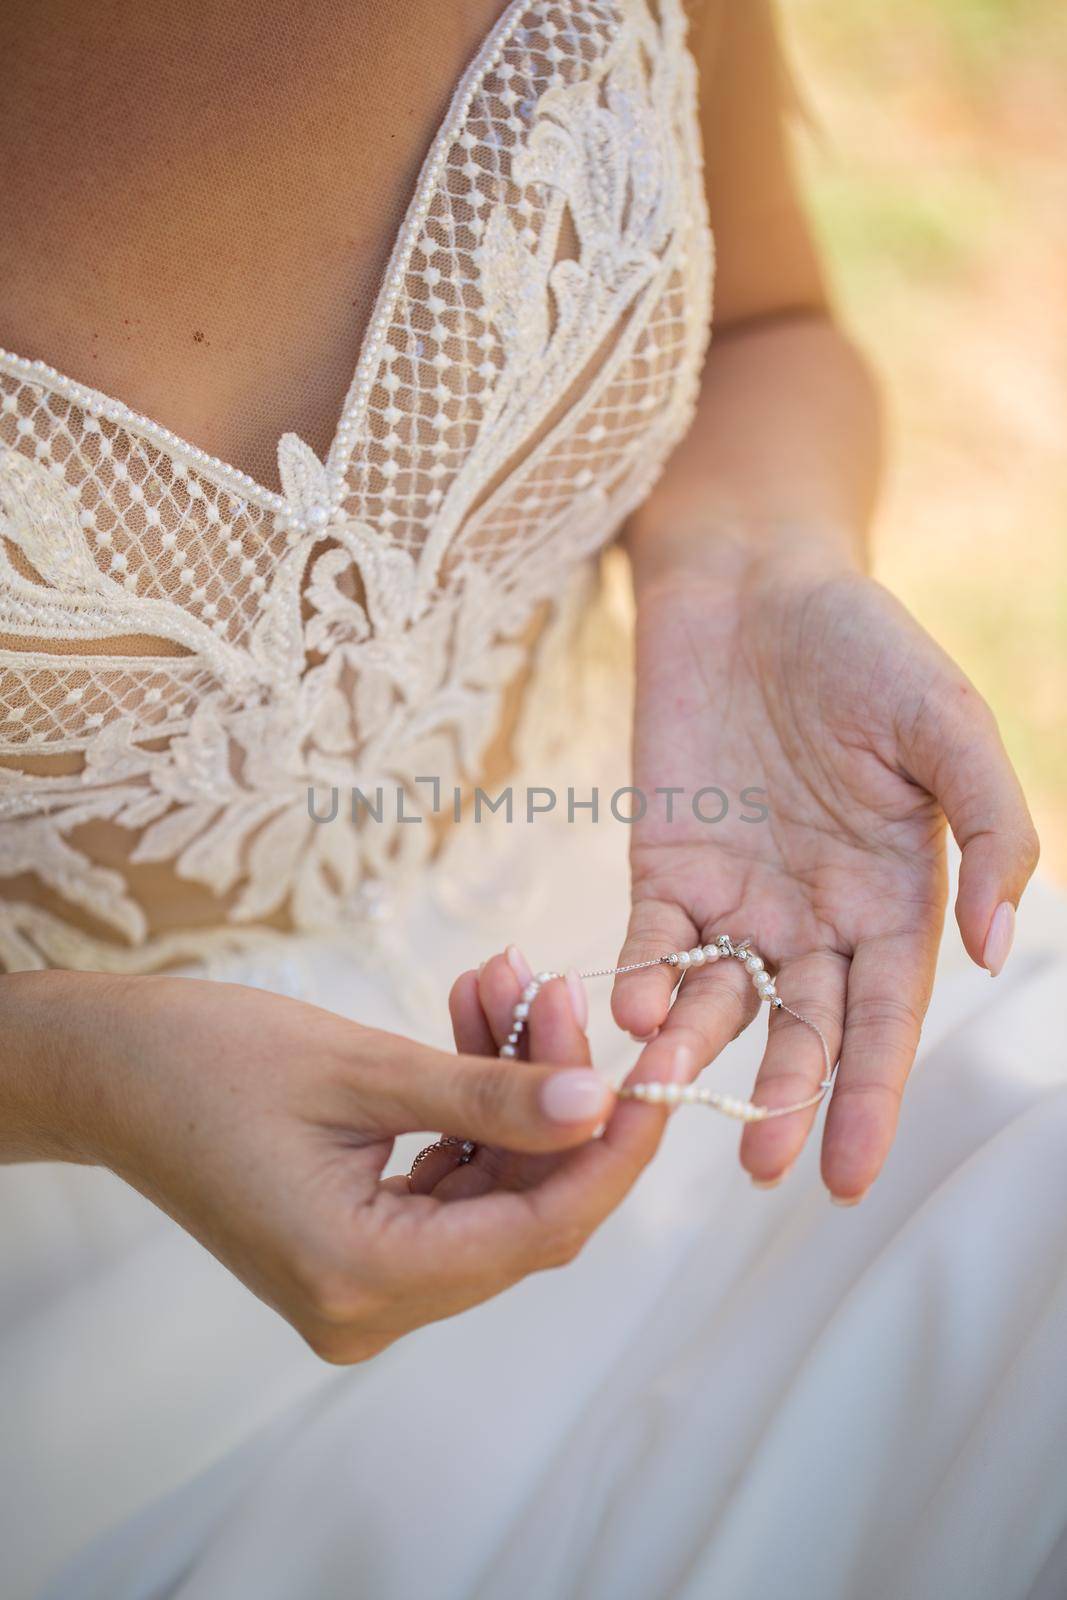 The bride holds a foot ornament in her hands